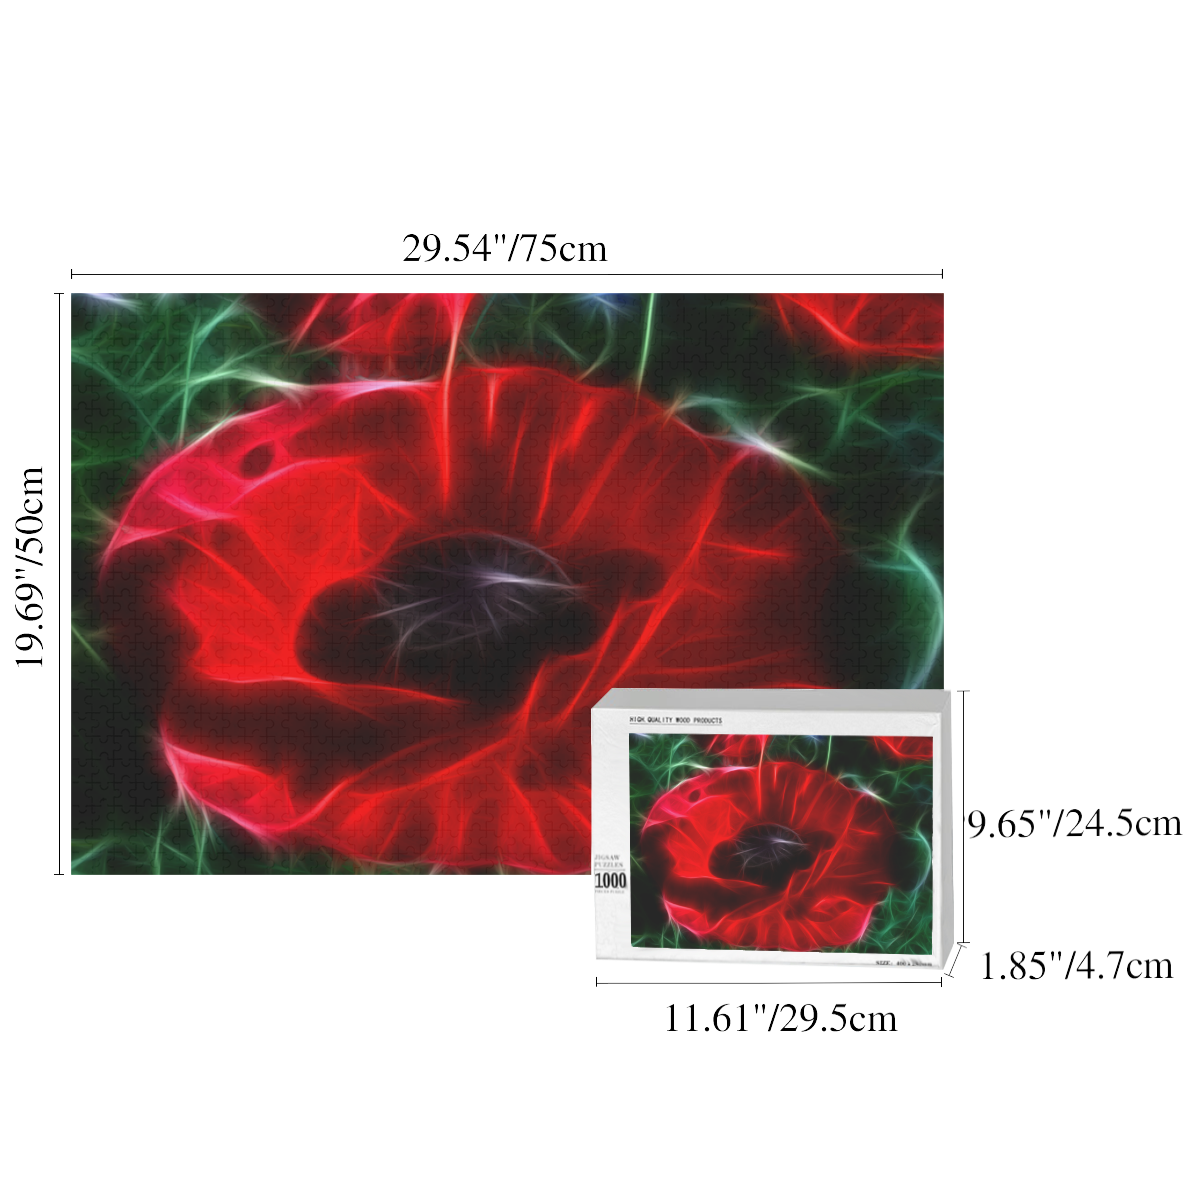 Wonderful Poppies In Summertime 1000-Piece Wooden Photo Puzzles